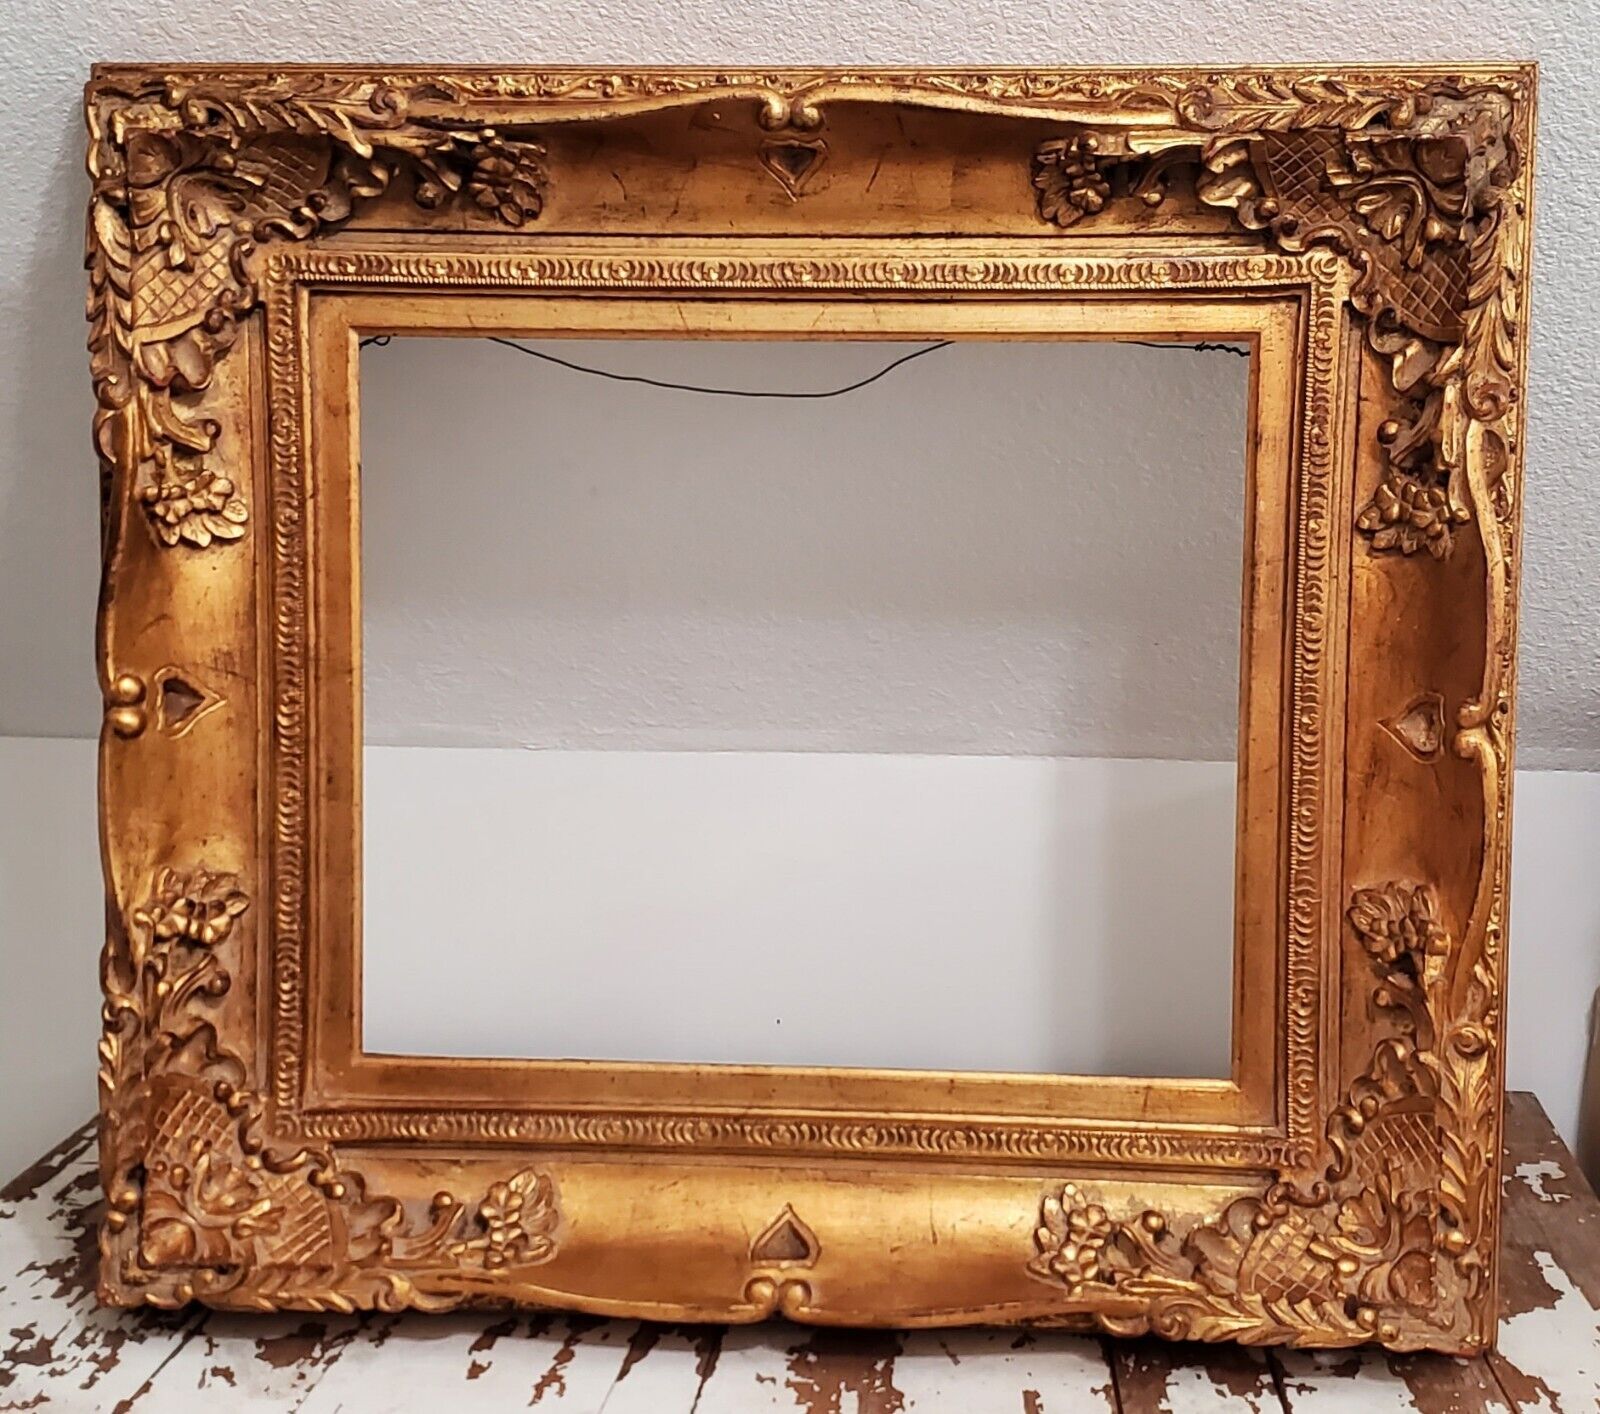 Antique Gold Gilded Massive Picture Frame Extra Large Musuem Quality Ornate